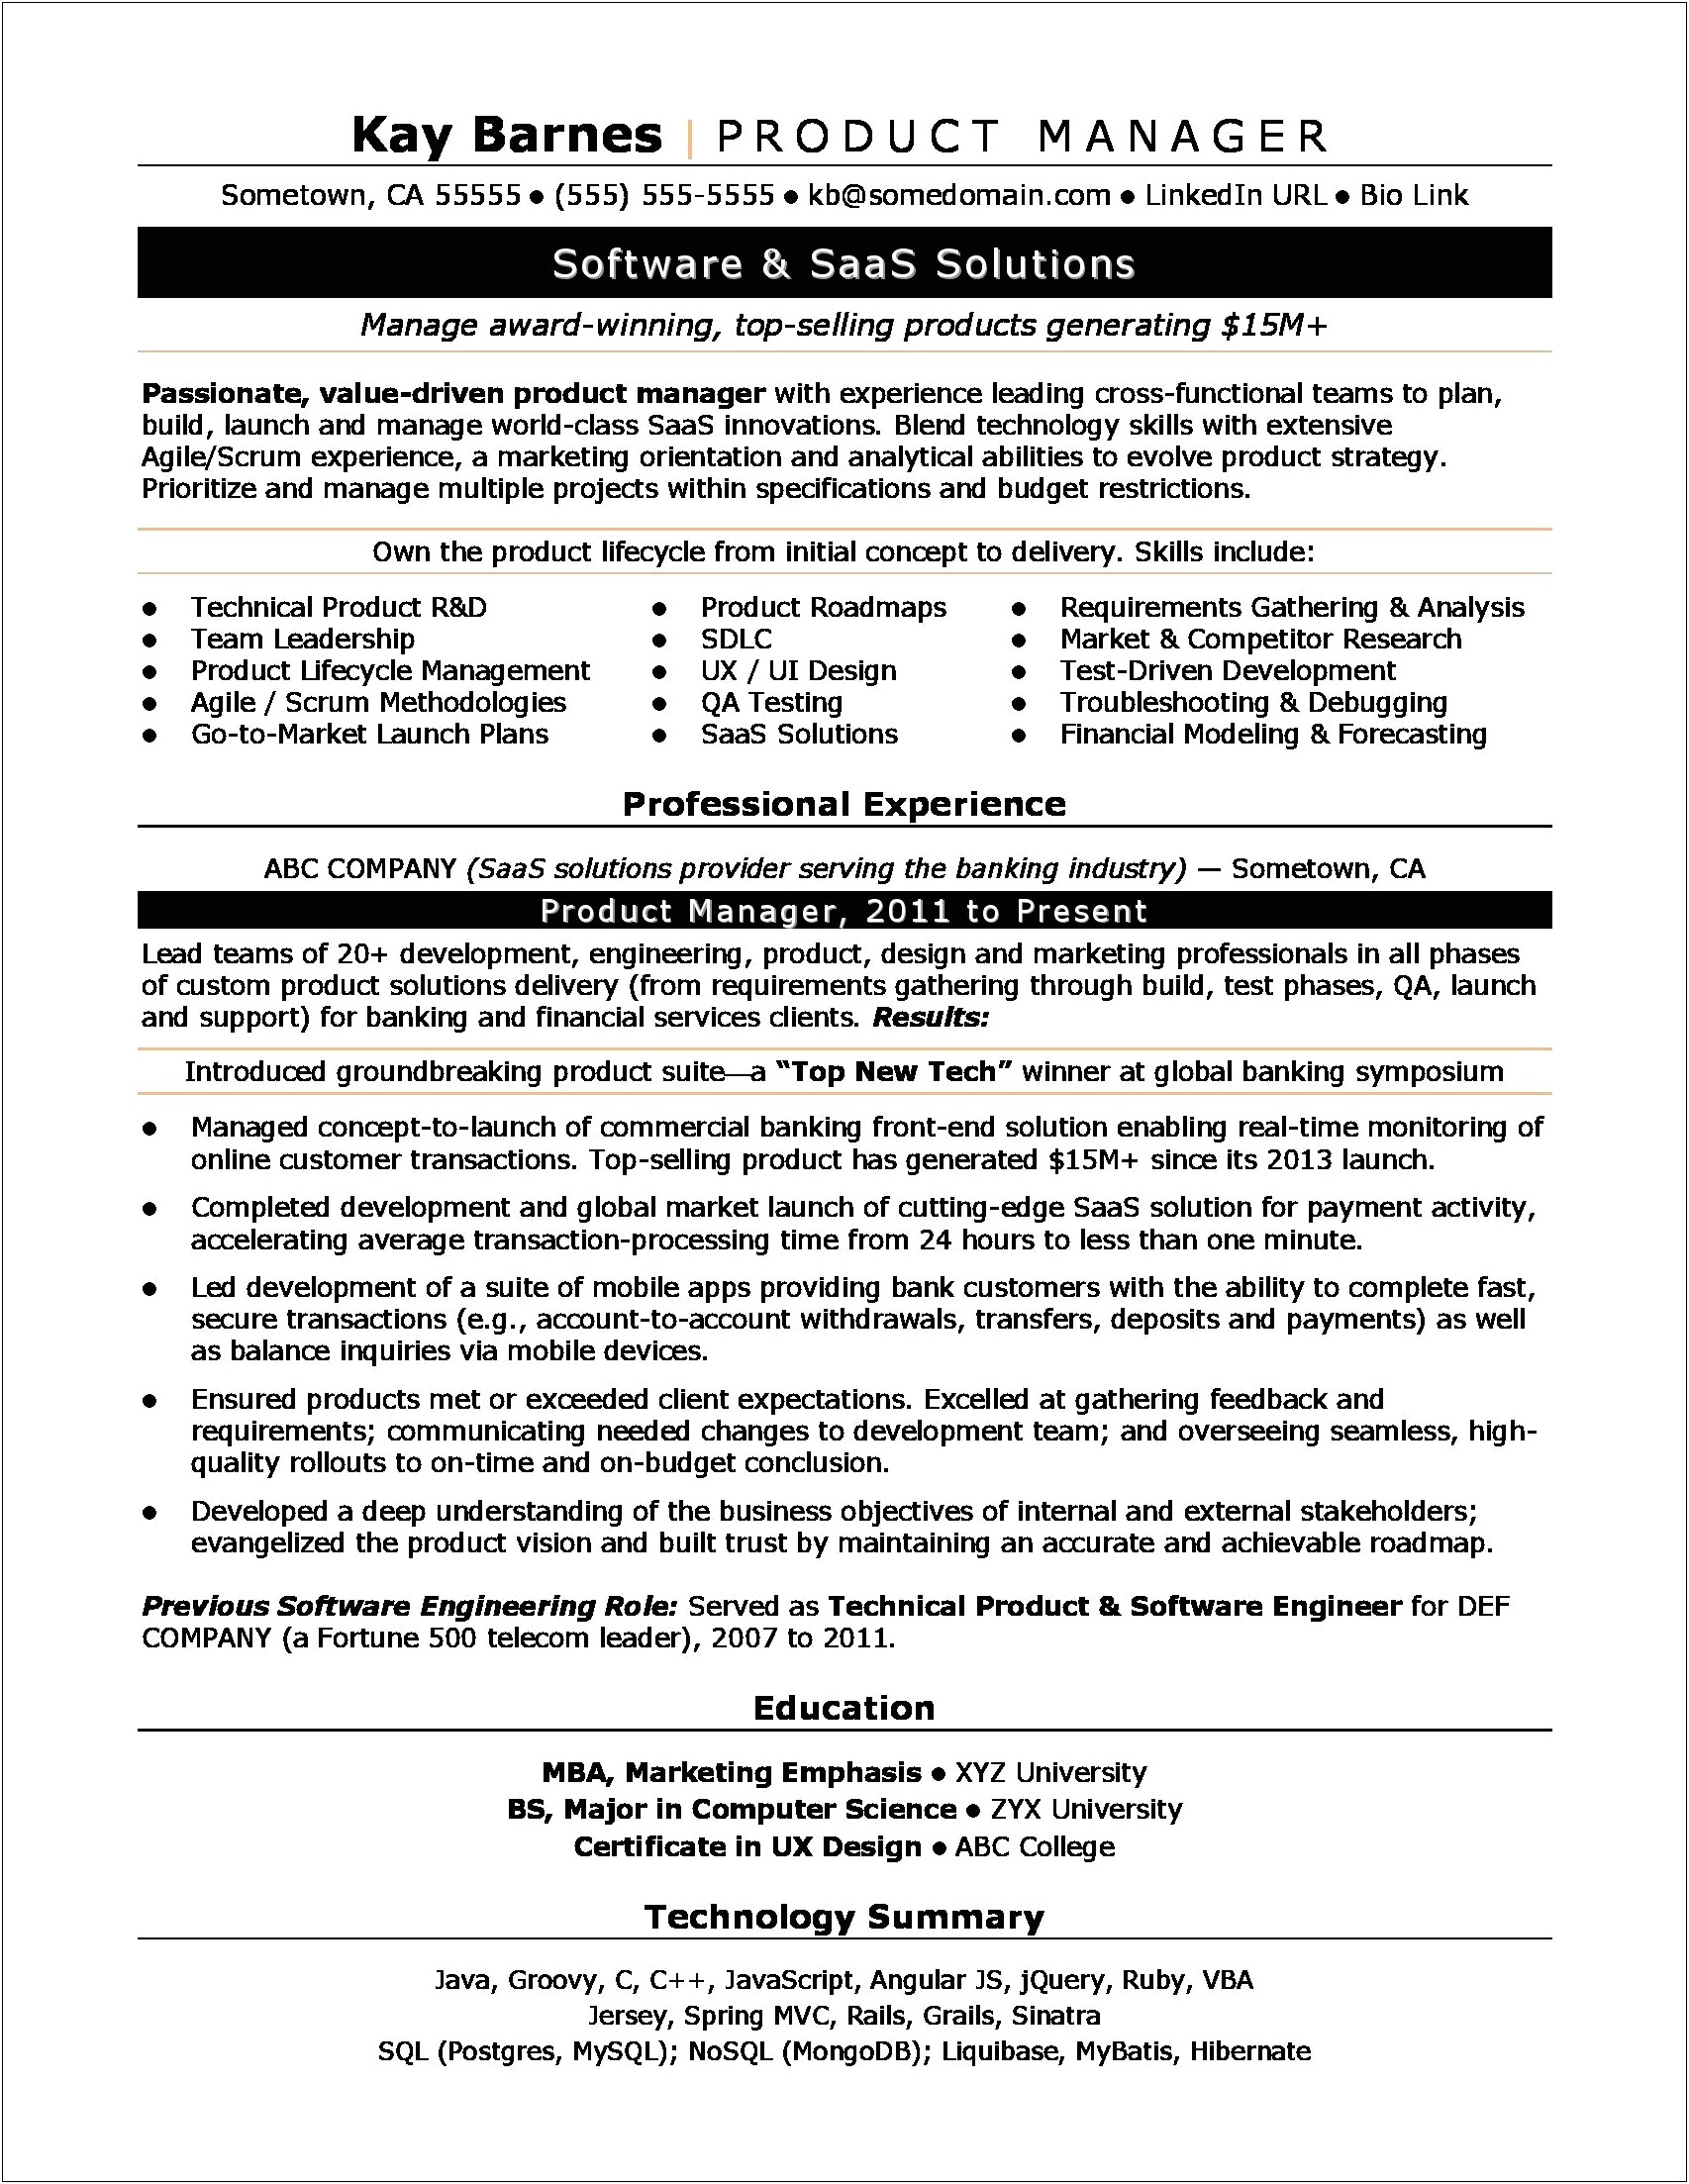 Resume Of Mba Healthcare Management Sample